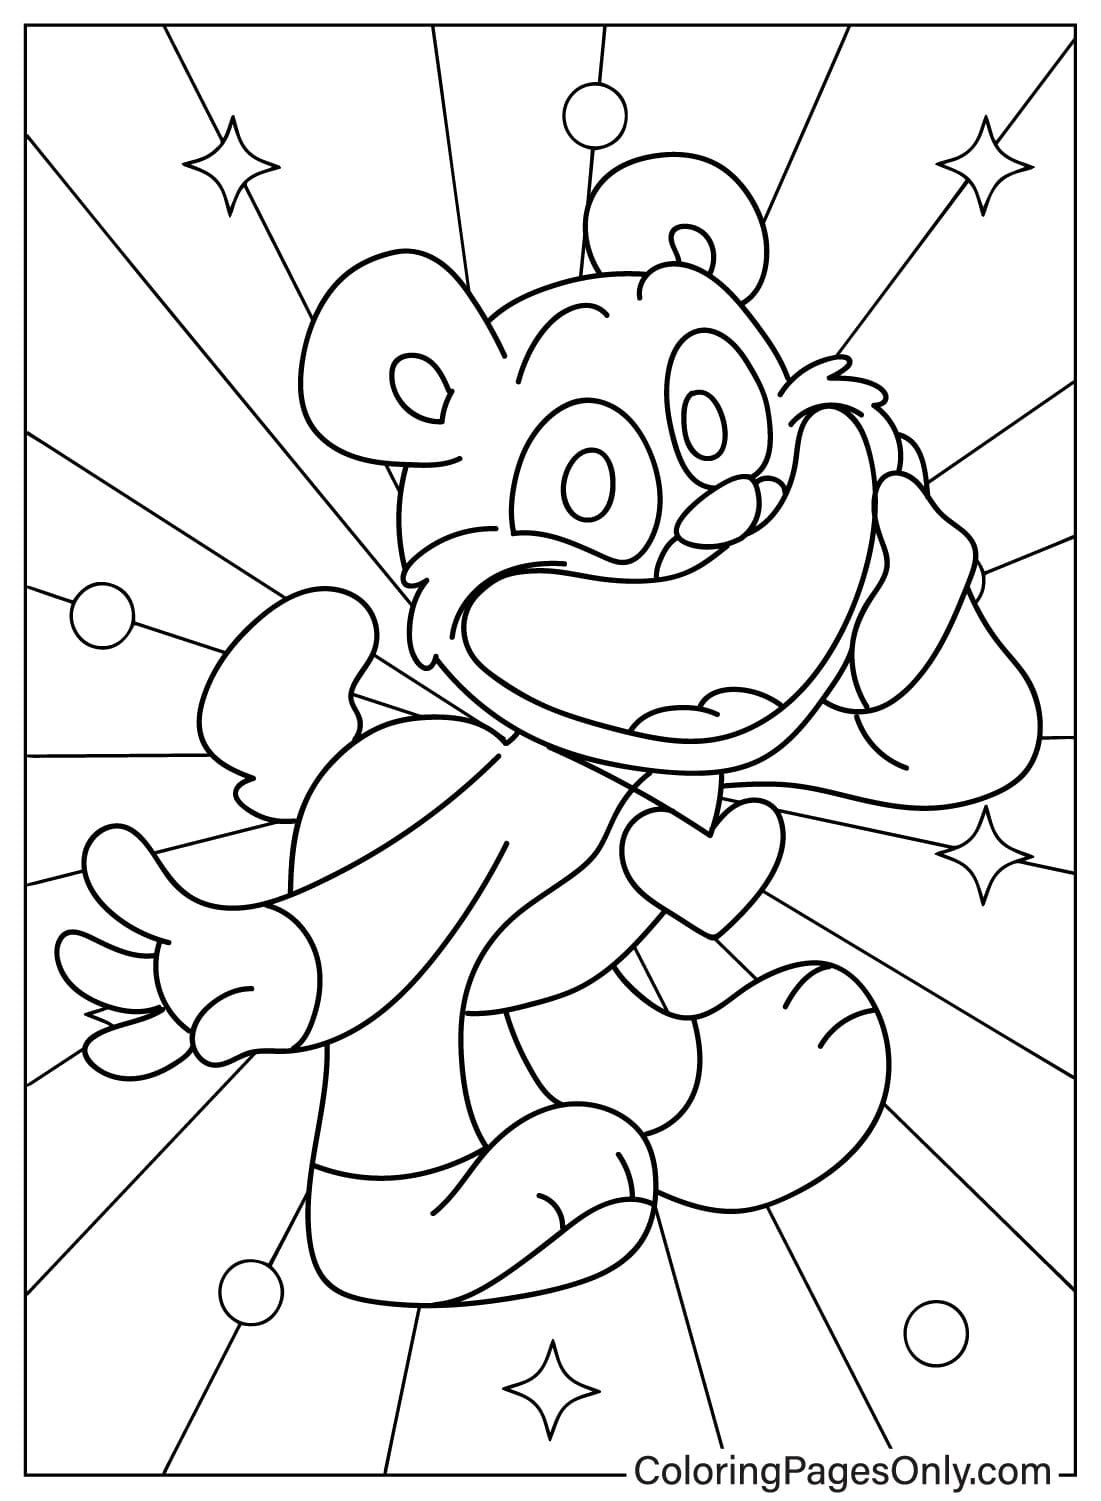 Smiling Critters Coloring Pages - Free Printable Coloring Pages